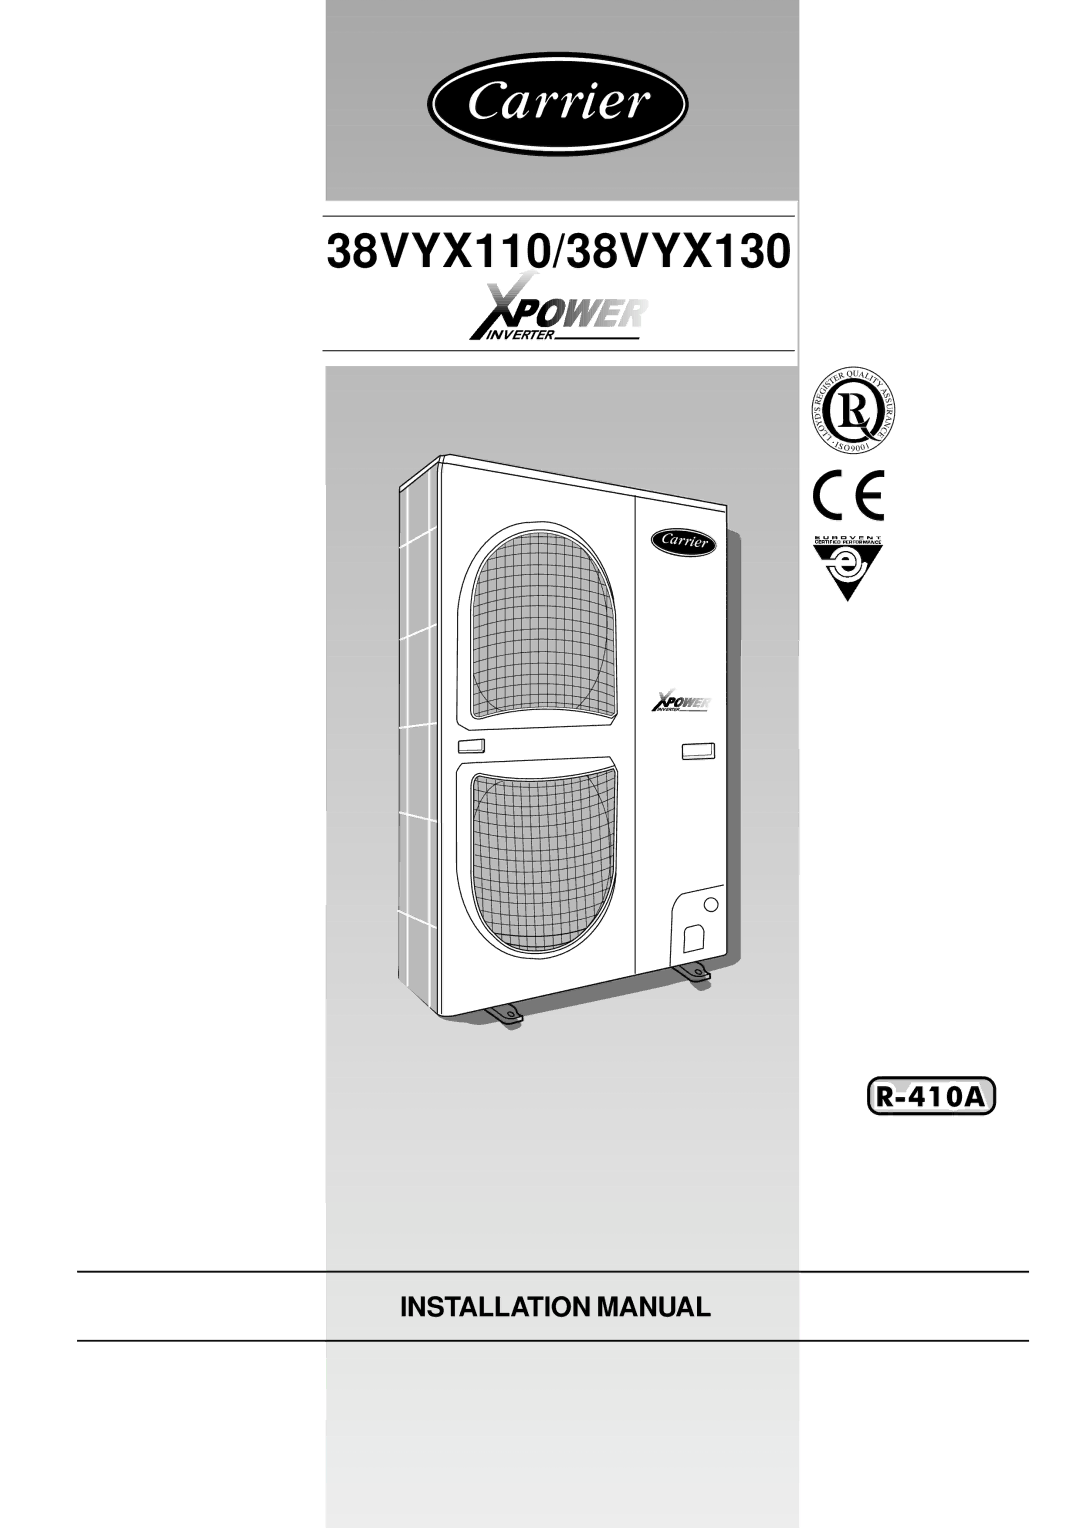 Carrier installation manual 38VYX110/38VYX130 